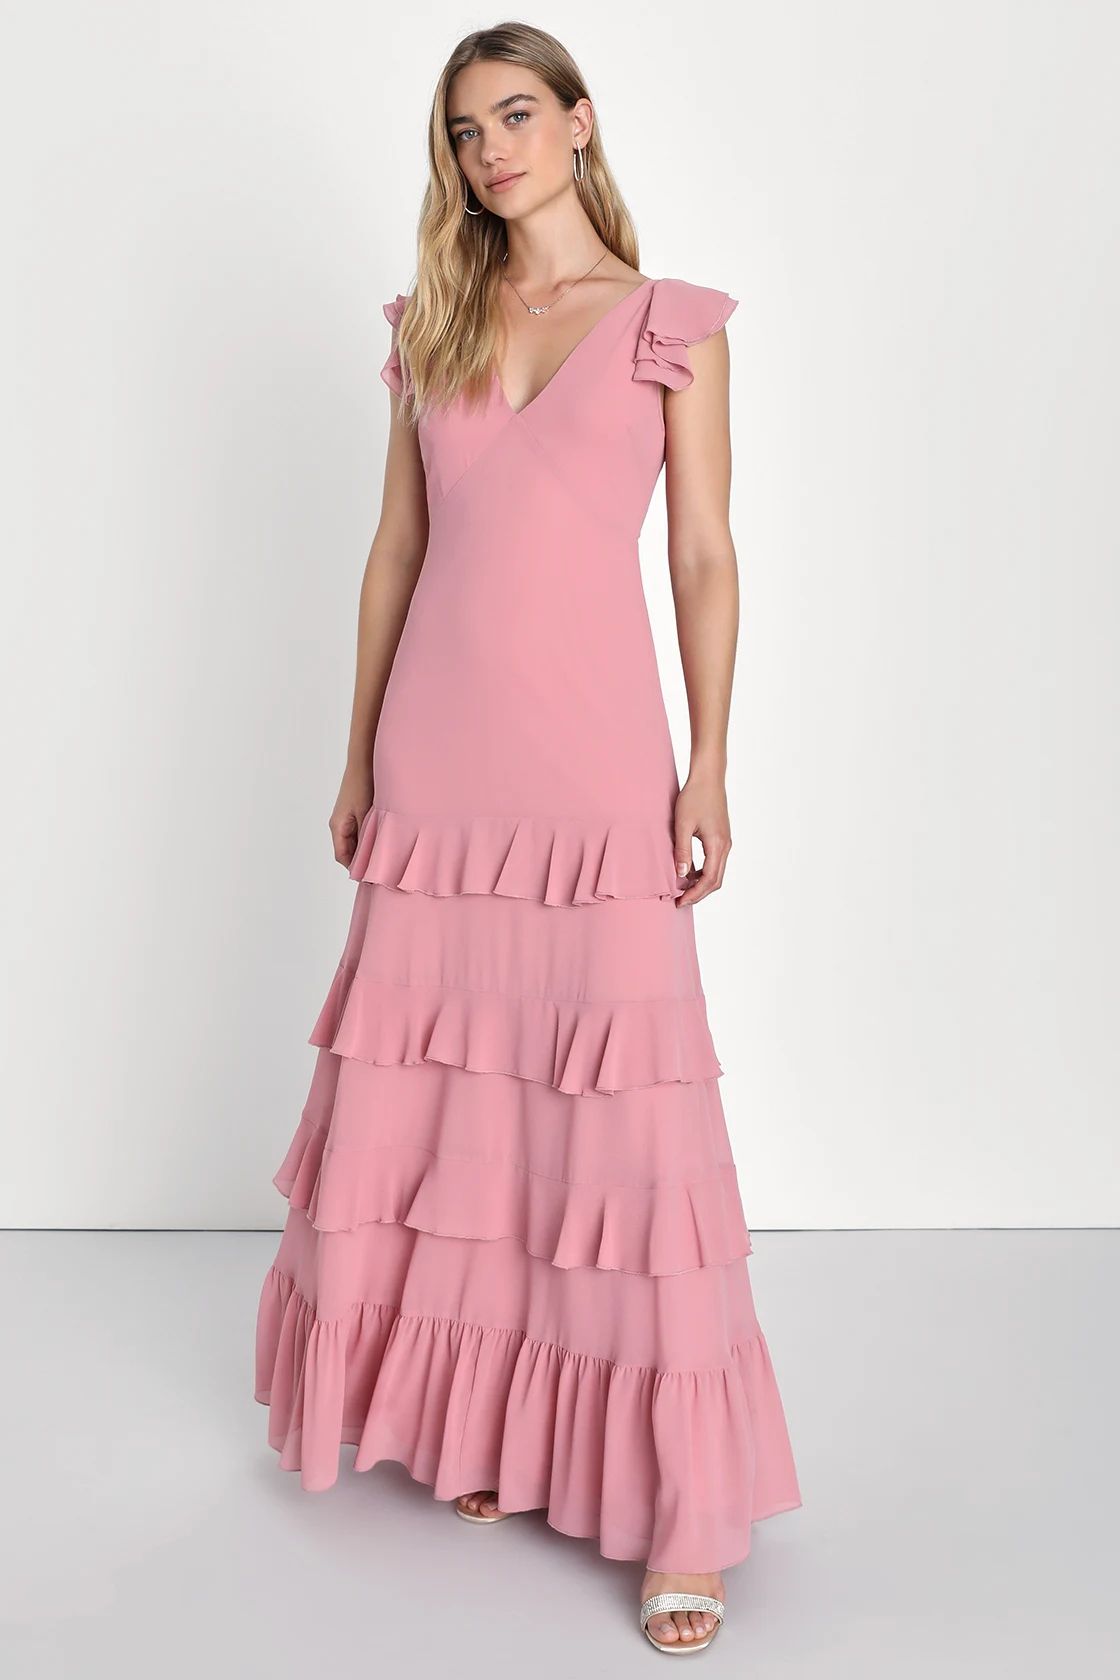 Exquisite Charm Dusty Rose Backless Ruffled Tiered Maxi Dress | Lulus (US)